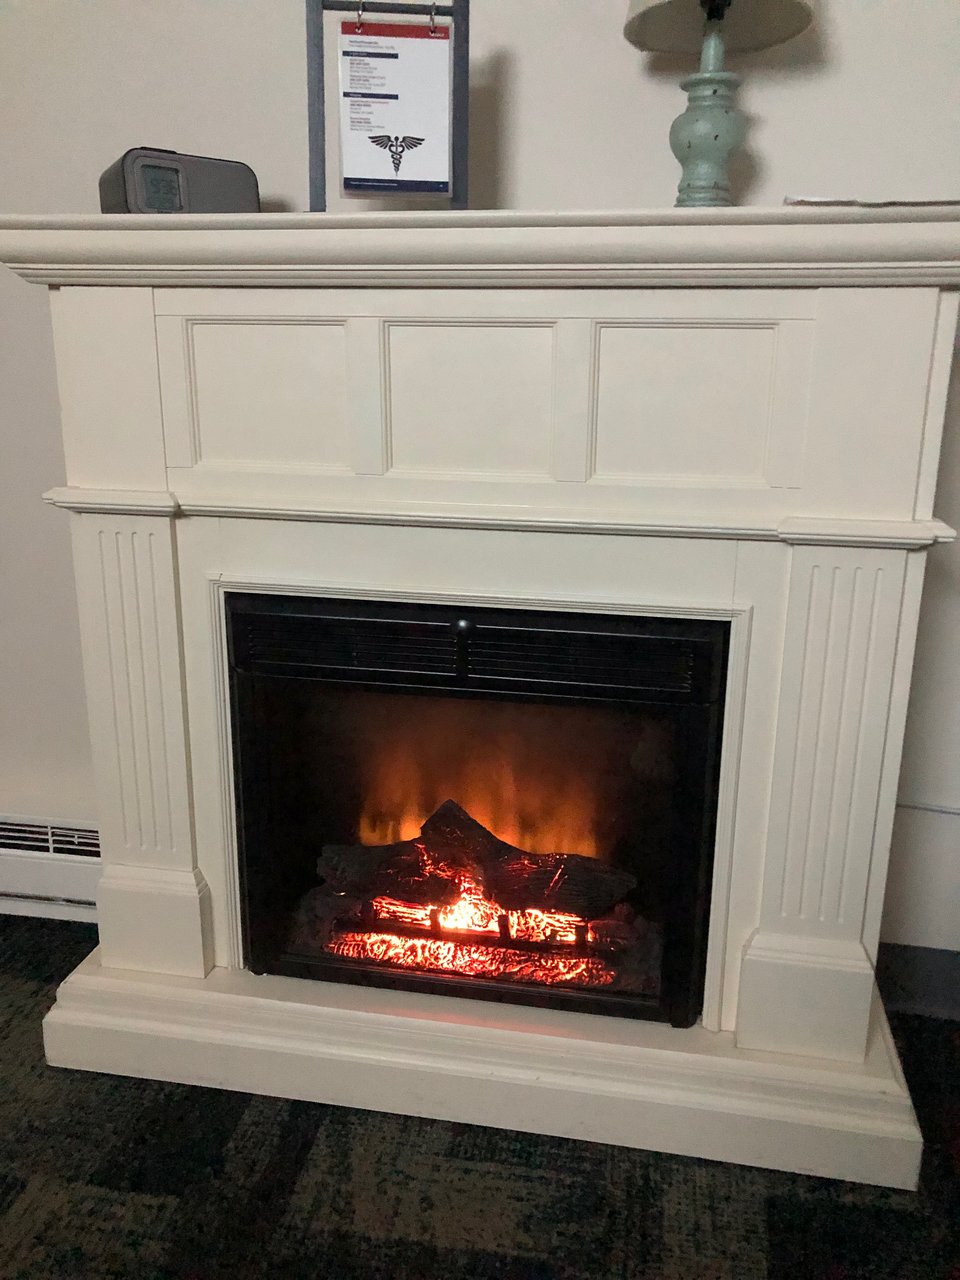 Gas Fireplace Smell Best Of Carbone S Beachside Suites $69 $Ì¶7Ì¶6Ì¶ Updated 2019